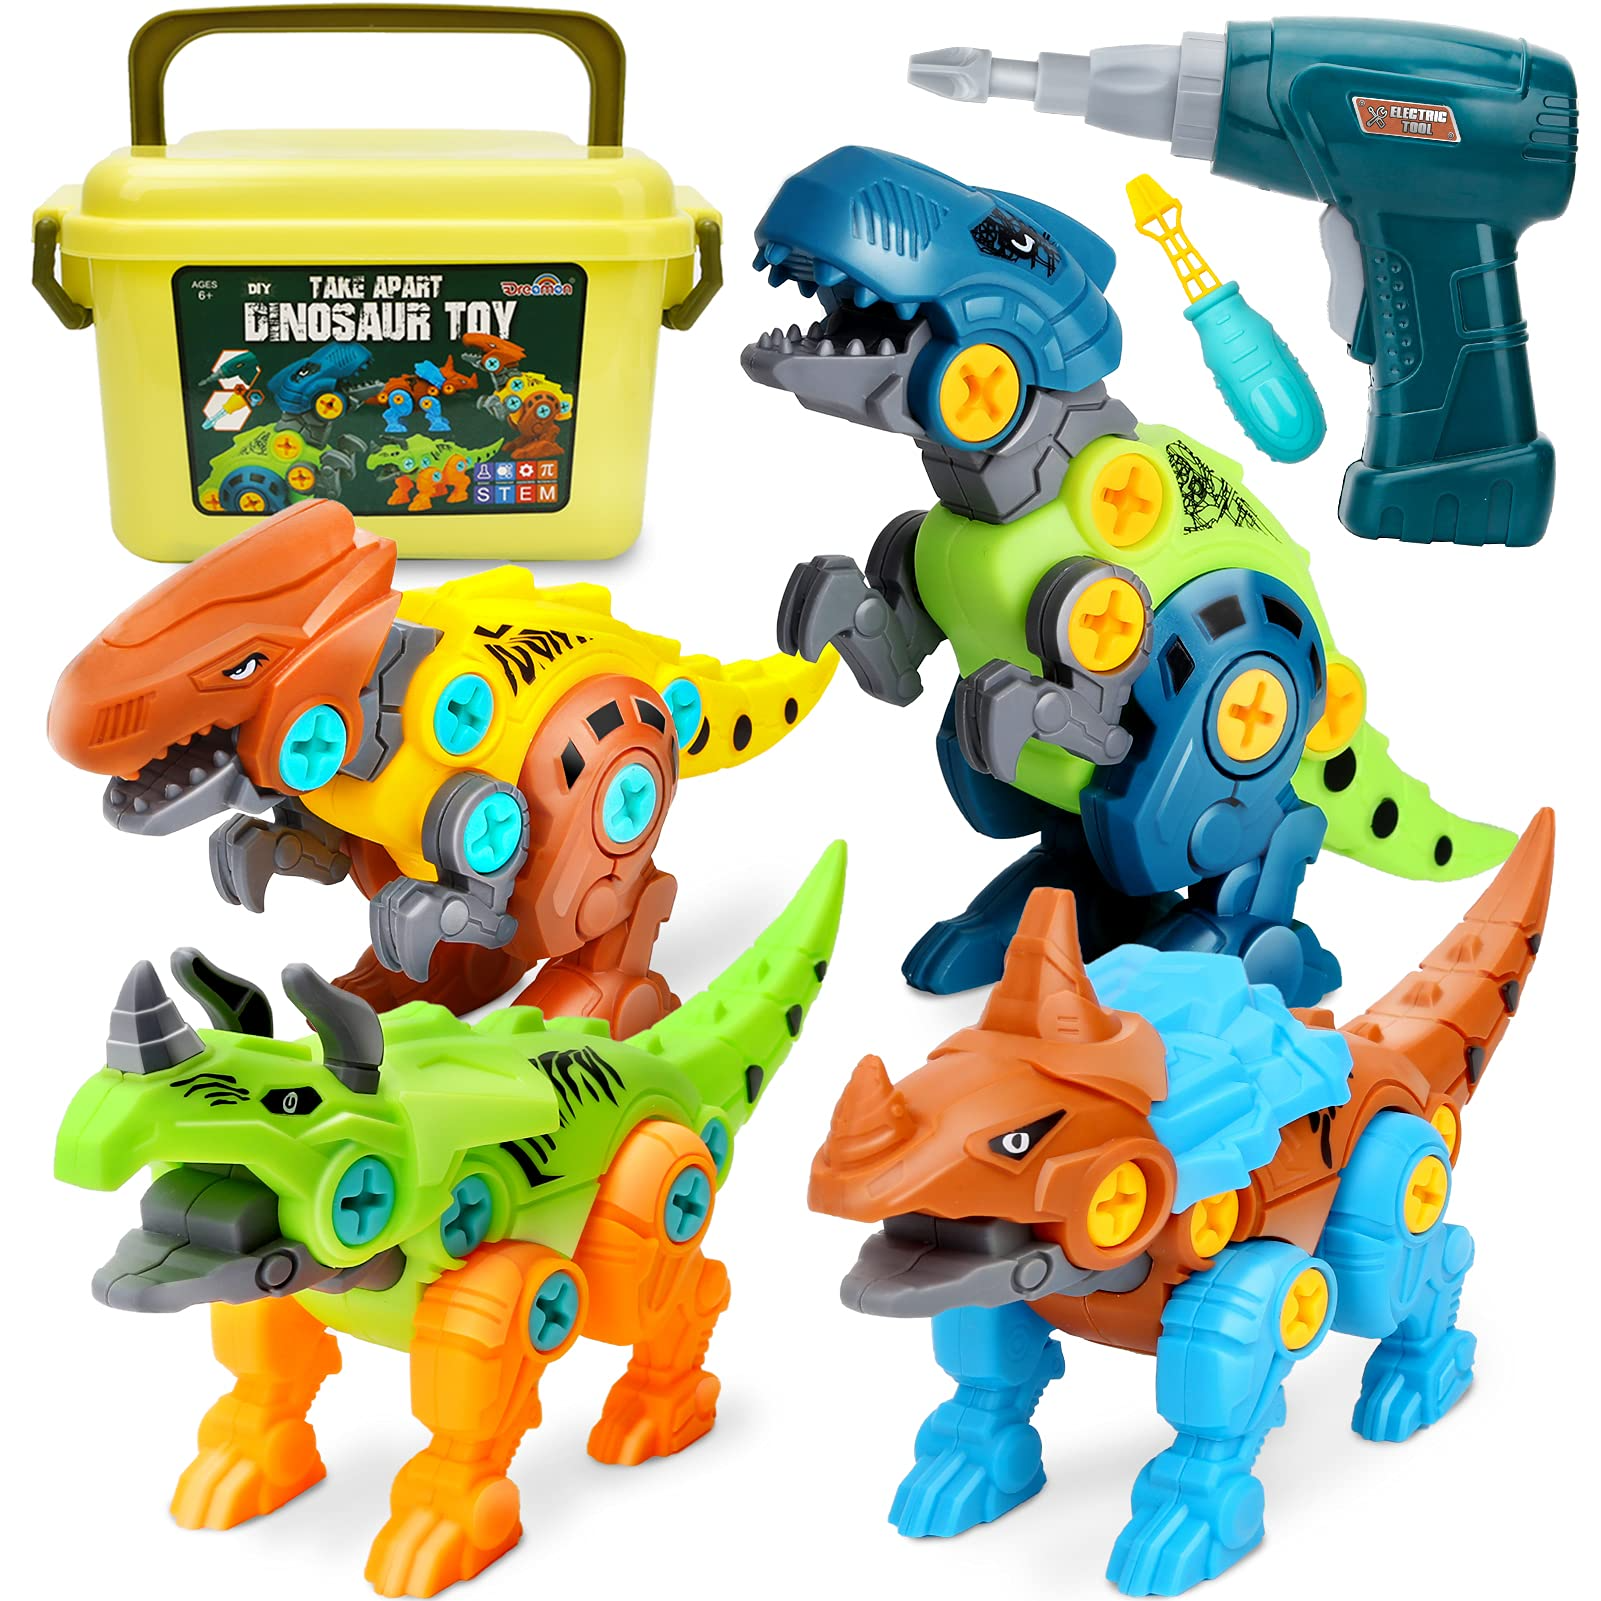 Building Toy Set Learning Gifts for Boys and Girls Construction Play Kit Take Apart Toys with Electric Drill VNVDFLM 3 Pcs Take Apart Dinosaur Toys for Kids Age 3 4 5 6 7 L-r3, Red, Green, Brown